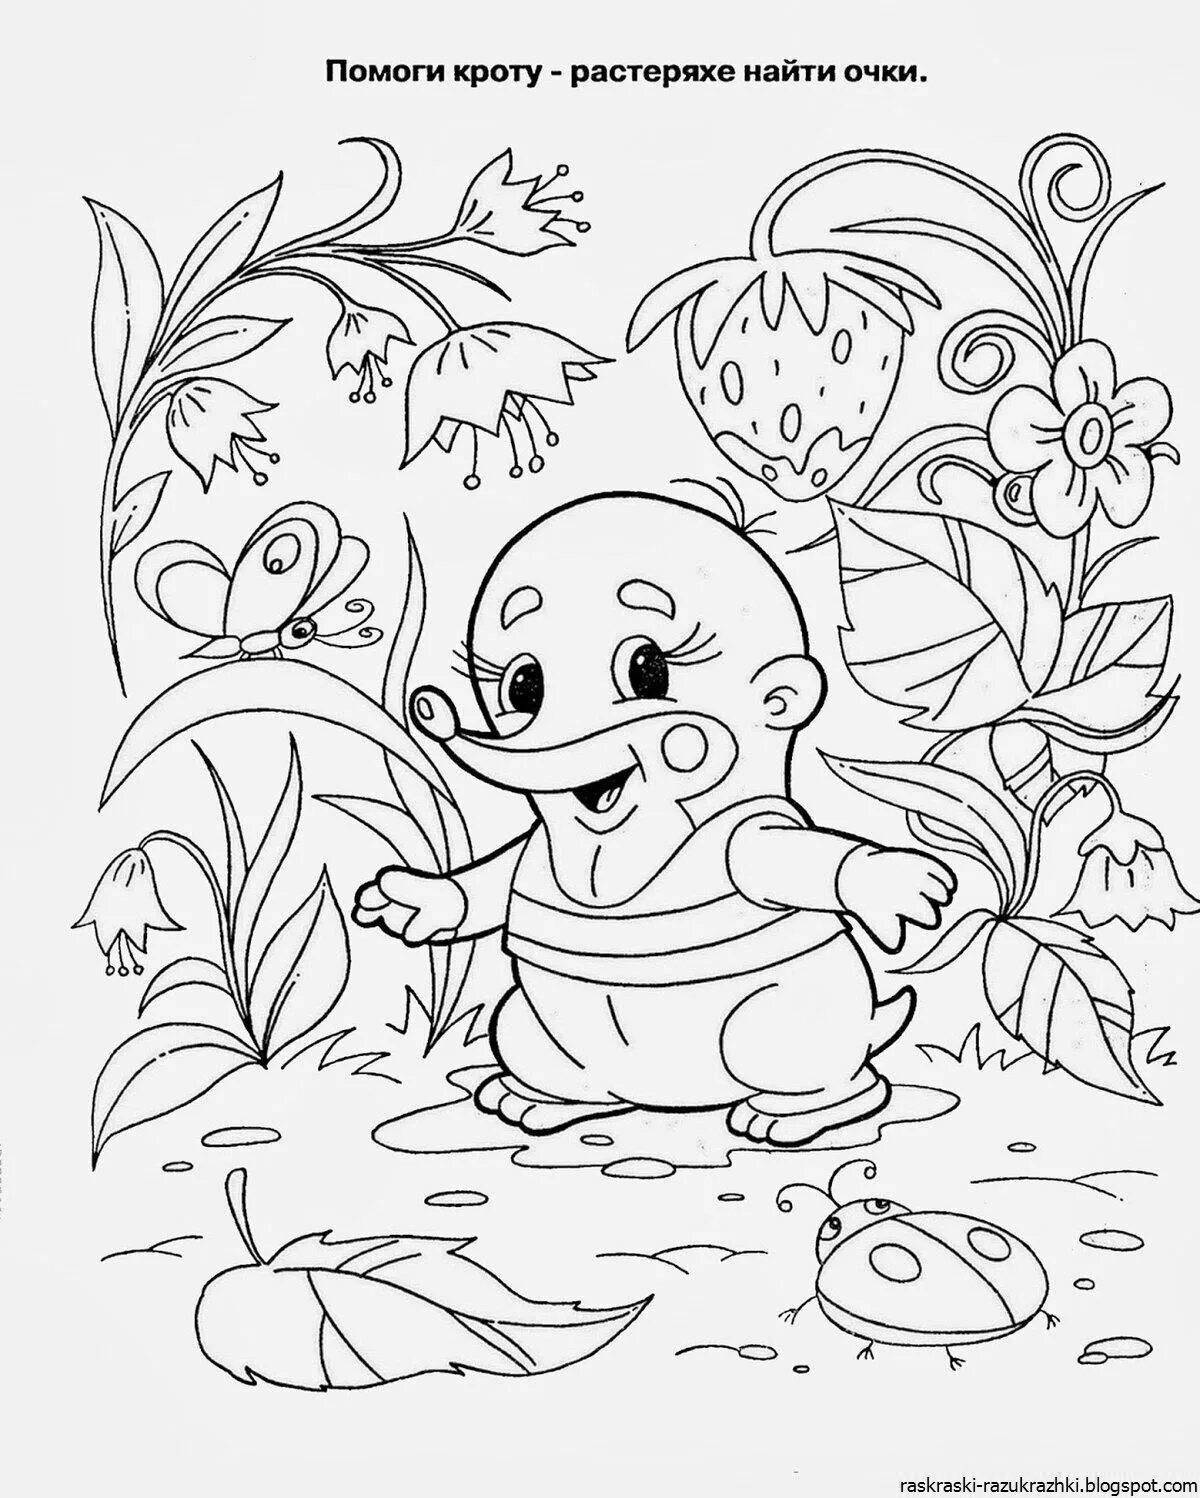 Color-frenzy coloring 5-7 years old